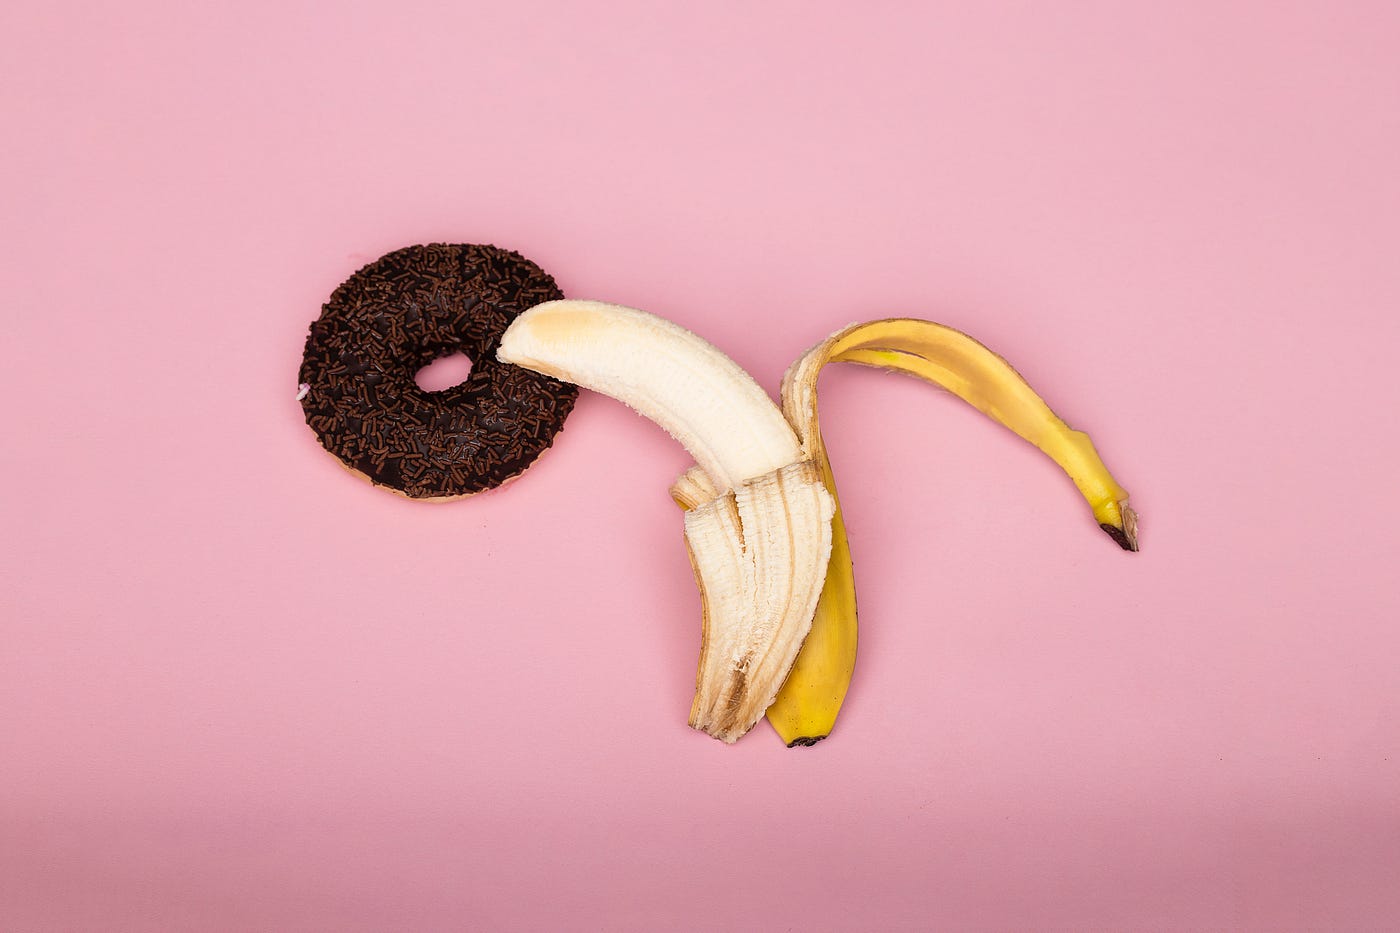 Erotic Banana Eating And 7 Other Things That Have Been Banned In China By Jessica Bugg An